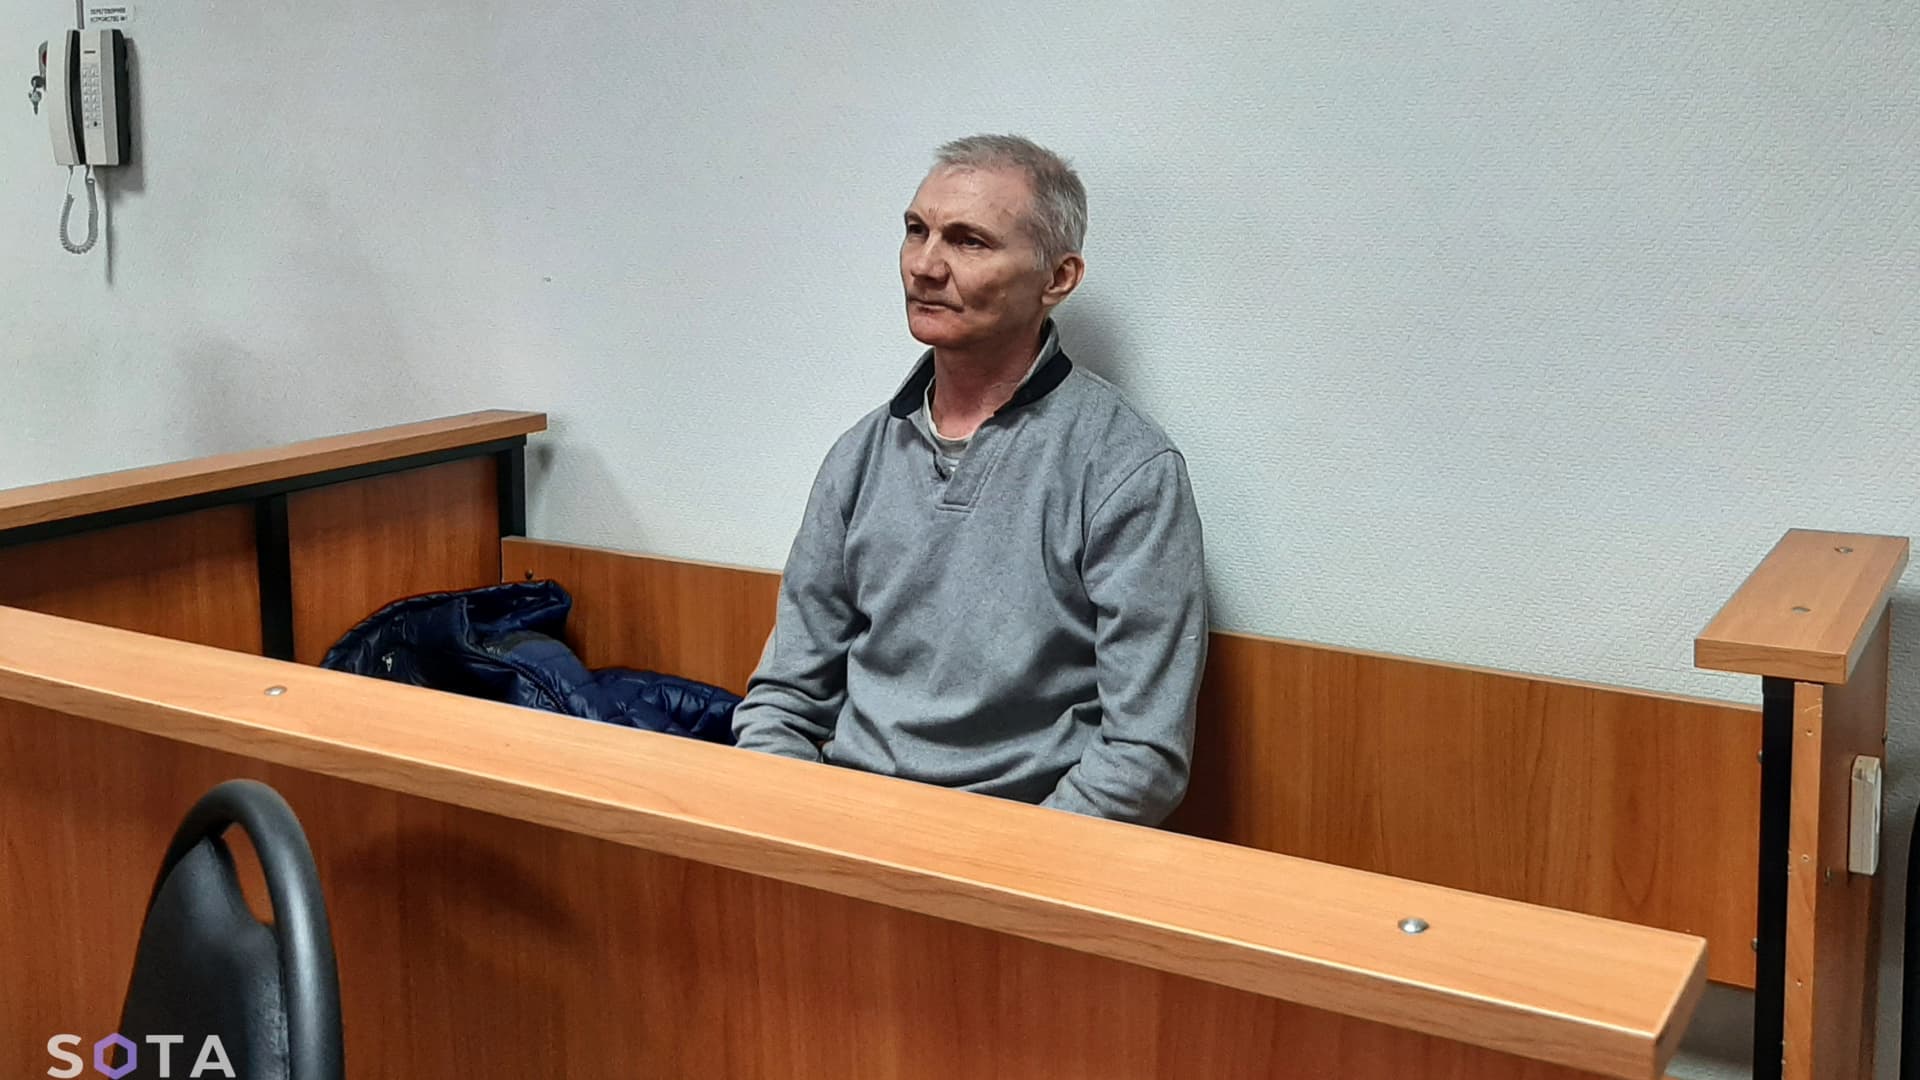 Russian citizen Alexei Moskalyov, who is accused of discrediting the country's armed forces in the course of Russia-Ukraine military conflict, attends a court hearing in the town of Yefremov in the Tula region, Russia, March 27, 2023.